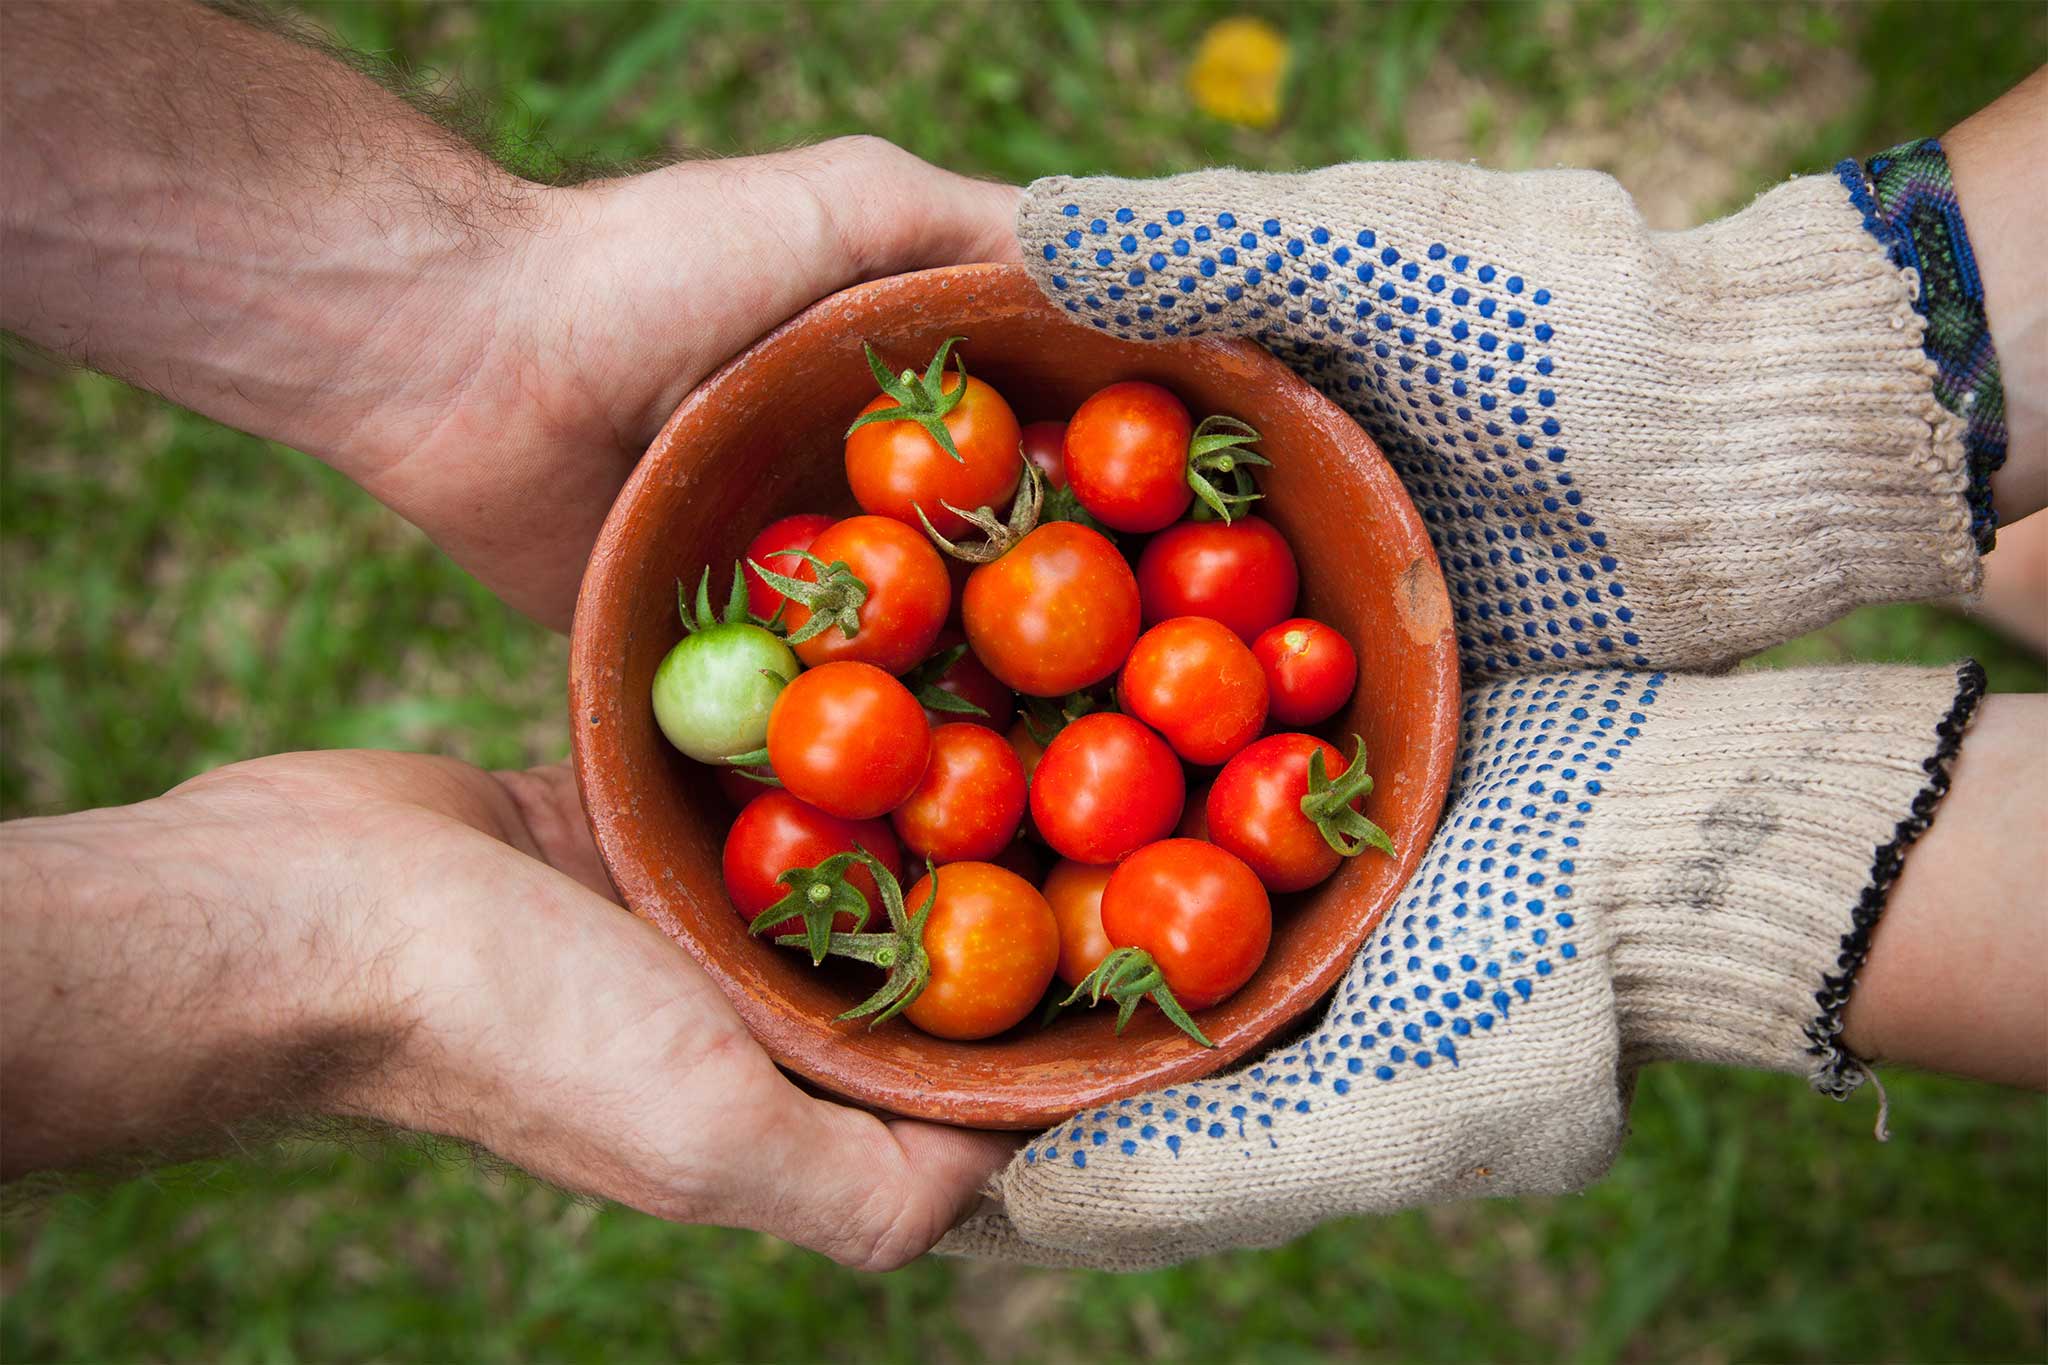 Two sets of hands, one in gardening gloves, hold a bowl of cherry tomatoes